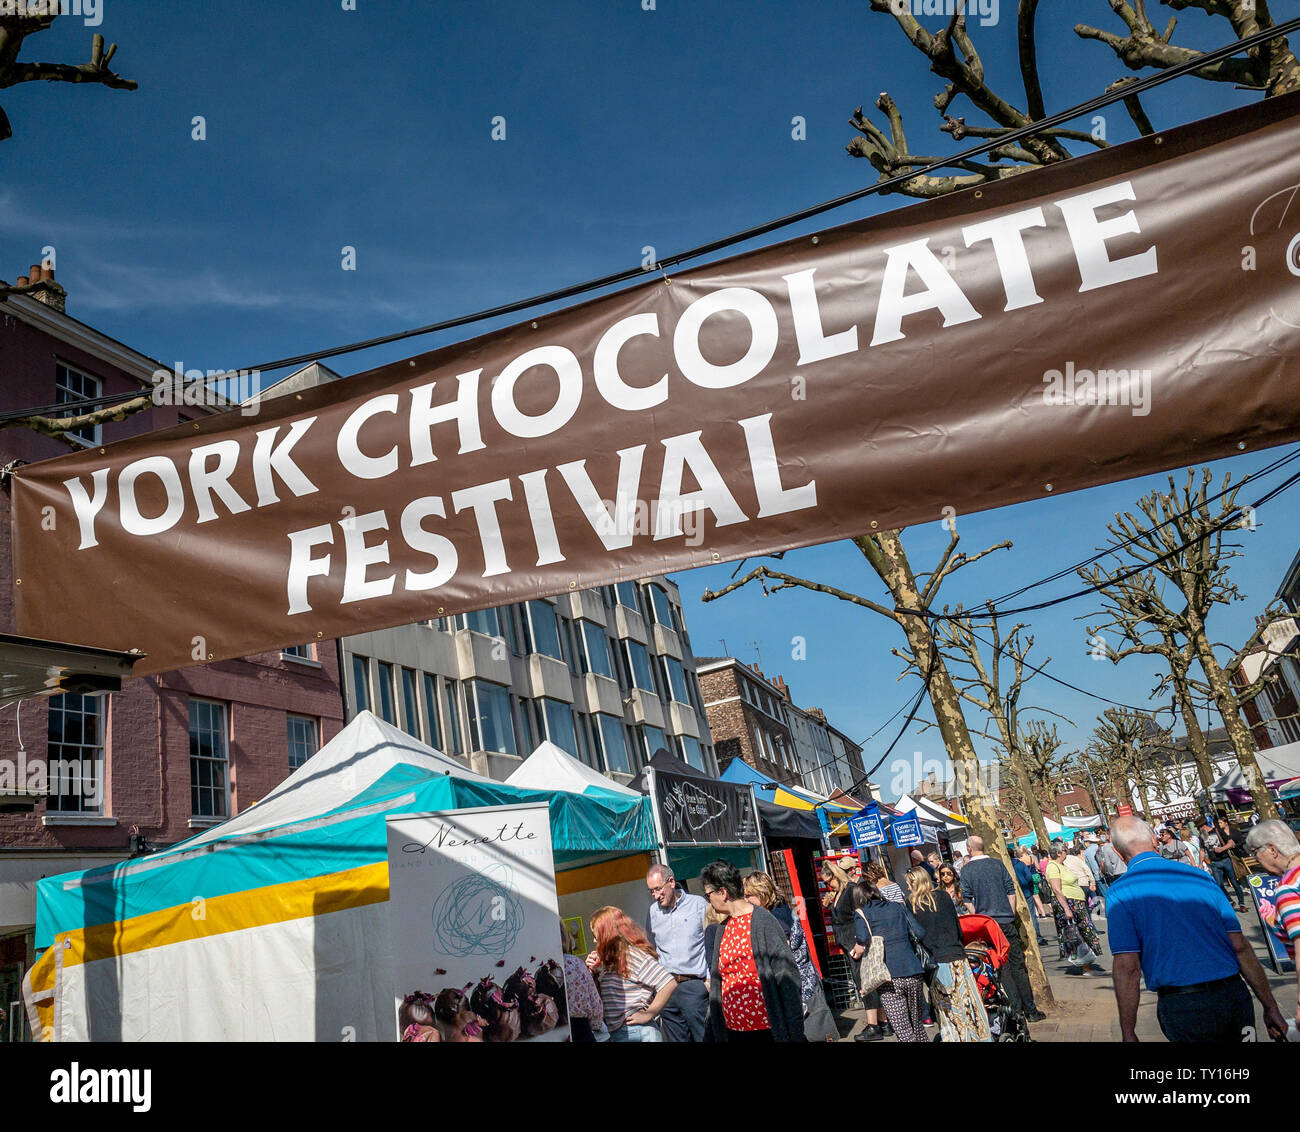 York Chocolate festival sign in Parliament Street, New York. Banque D'Images